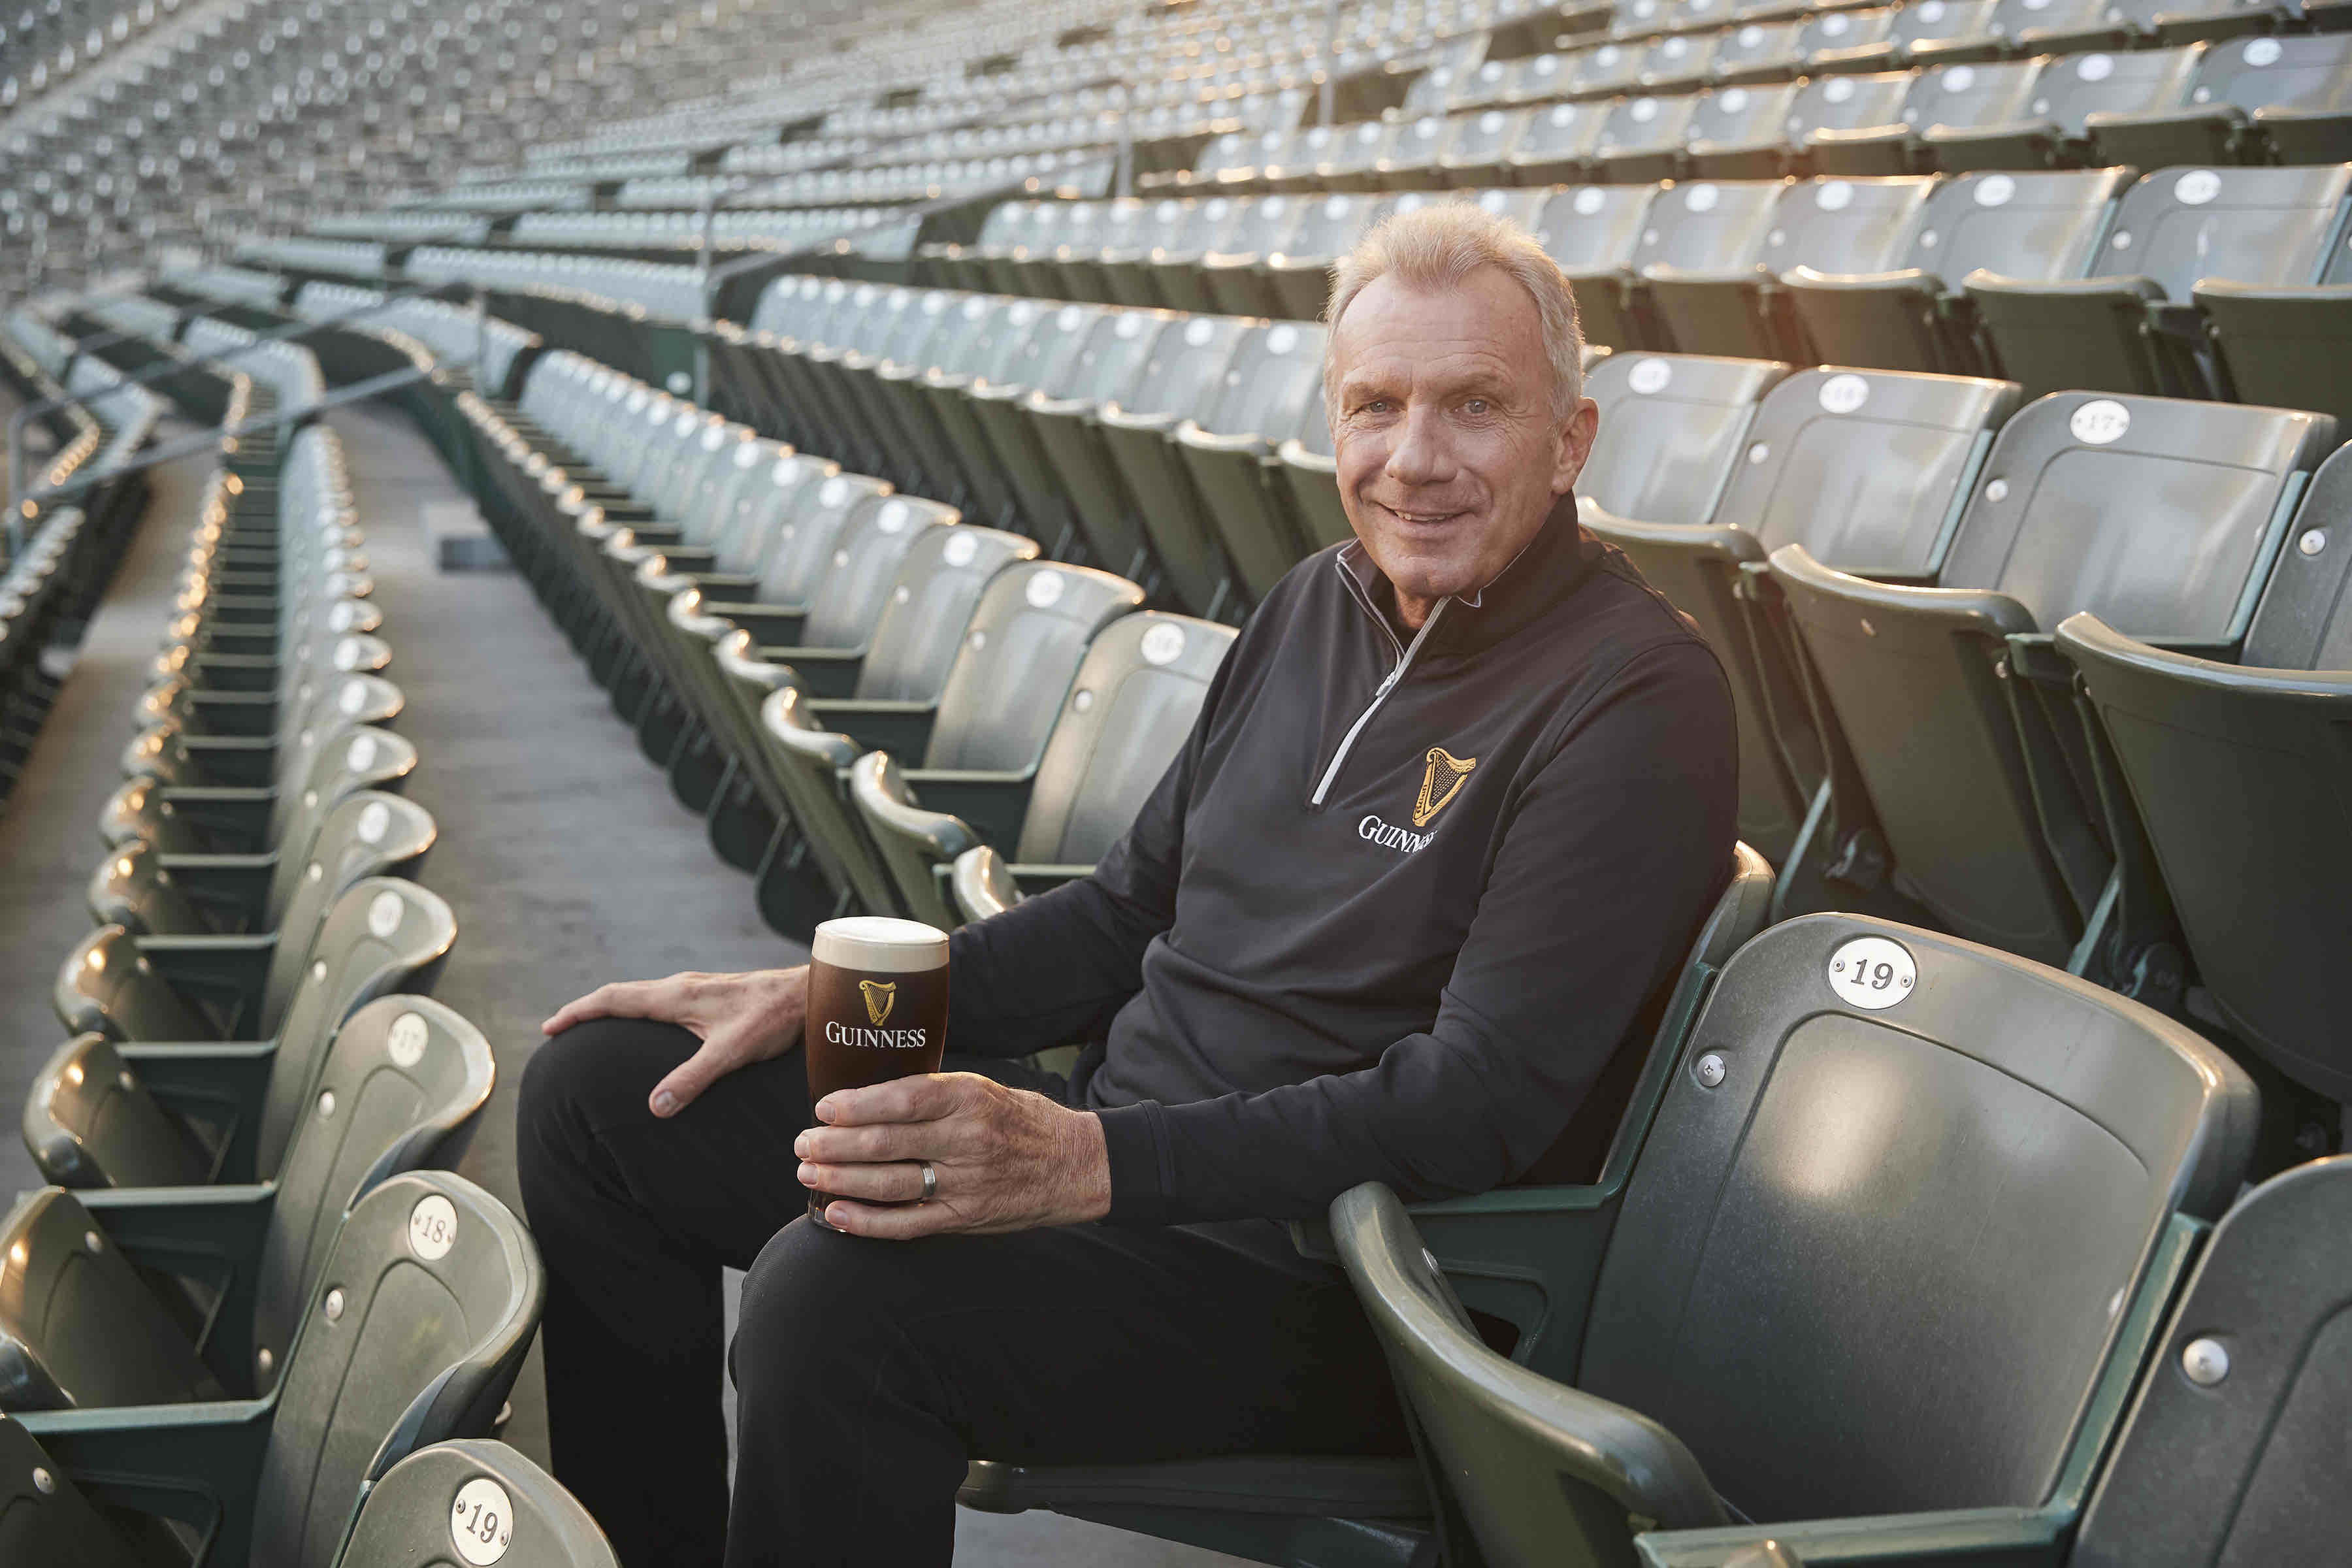 image of Joe Montana with a Guinness Draught courtesy of Guinness